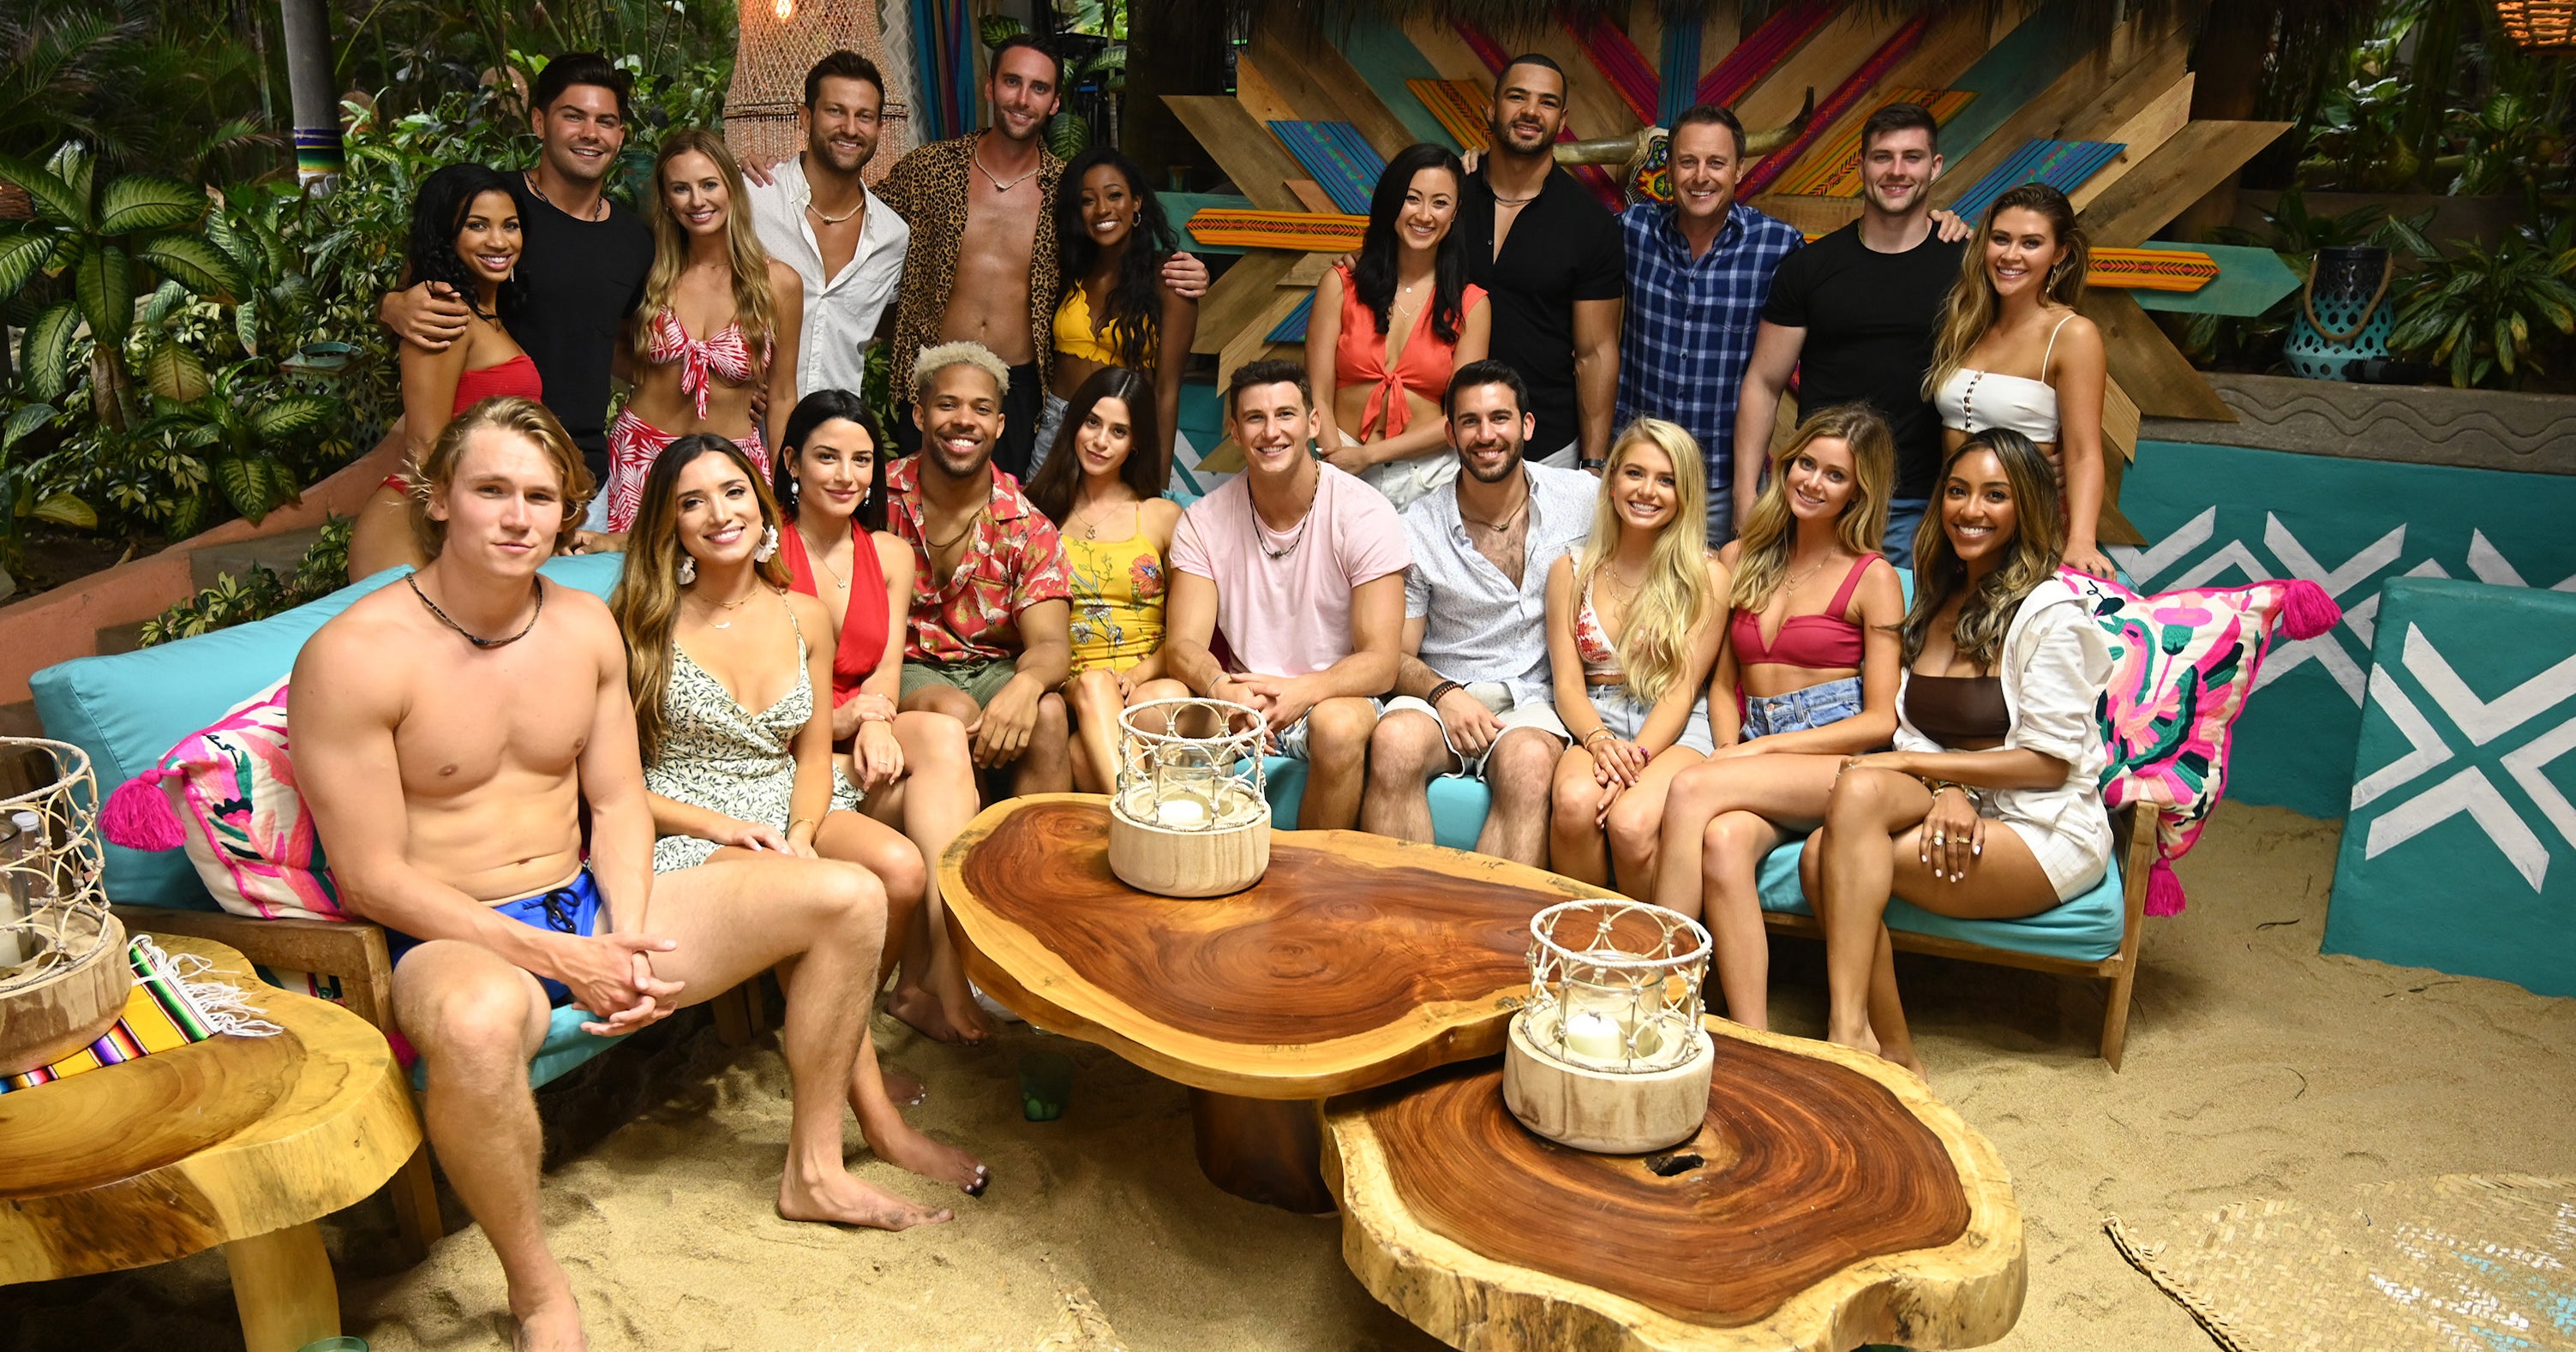 BIP Finale Reunion Clues From The Newest Promo Video